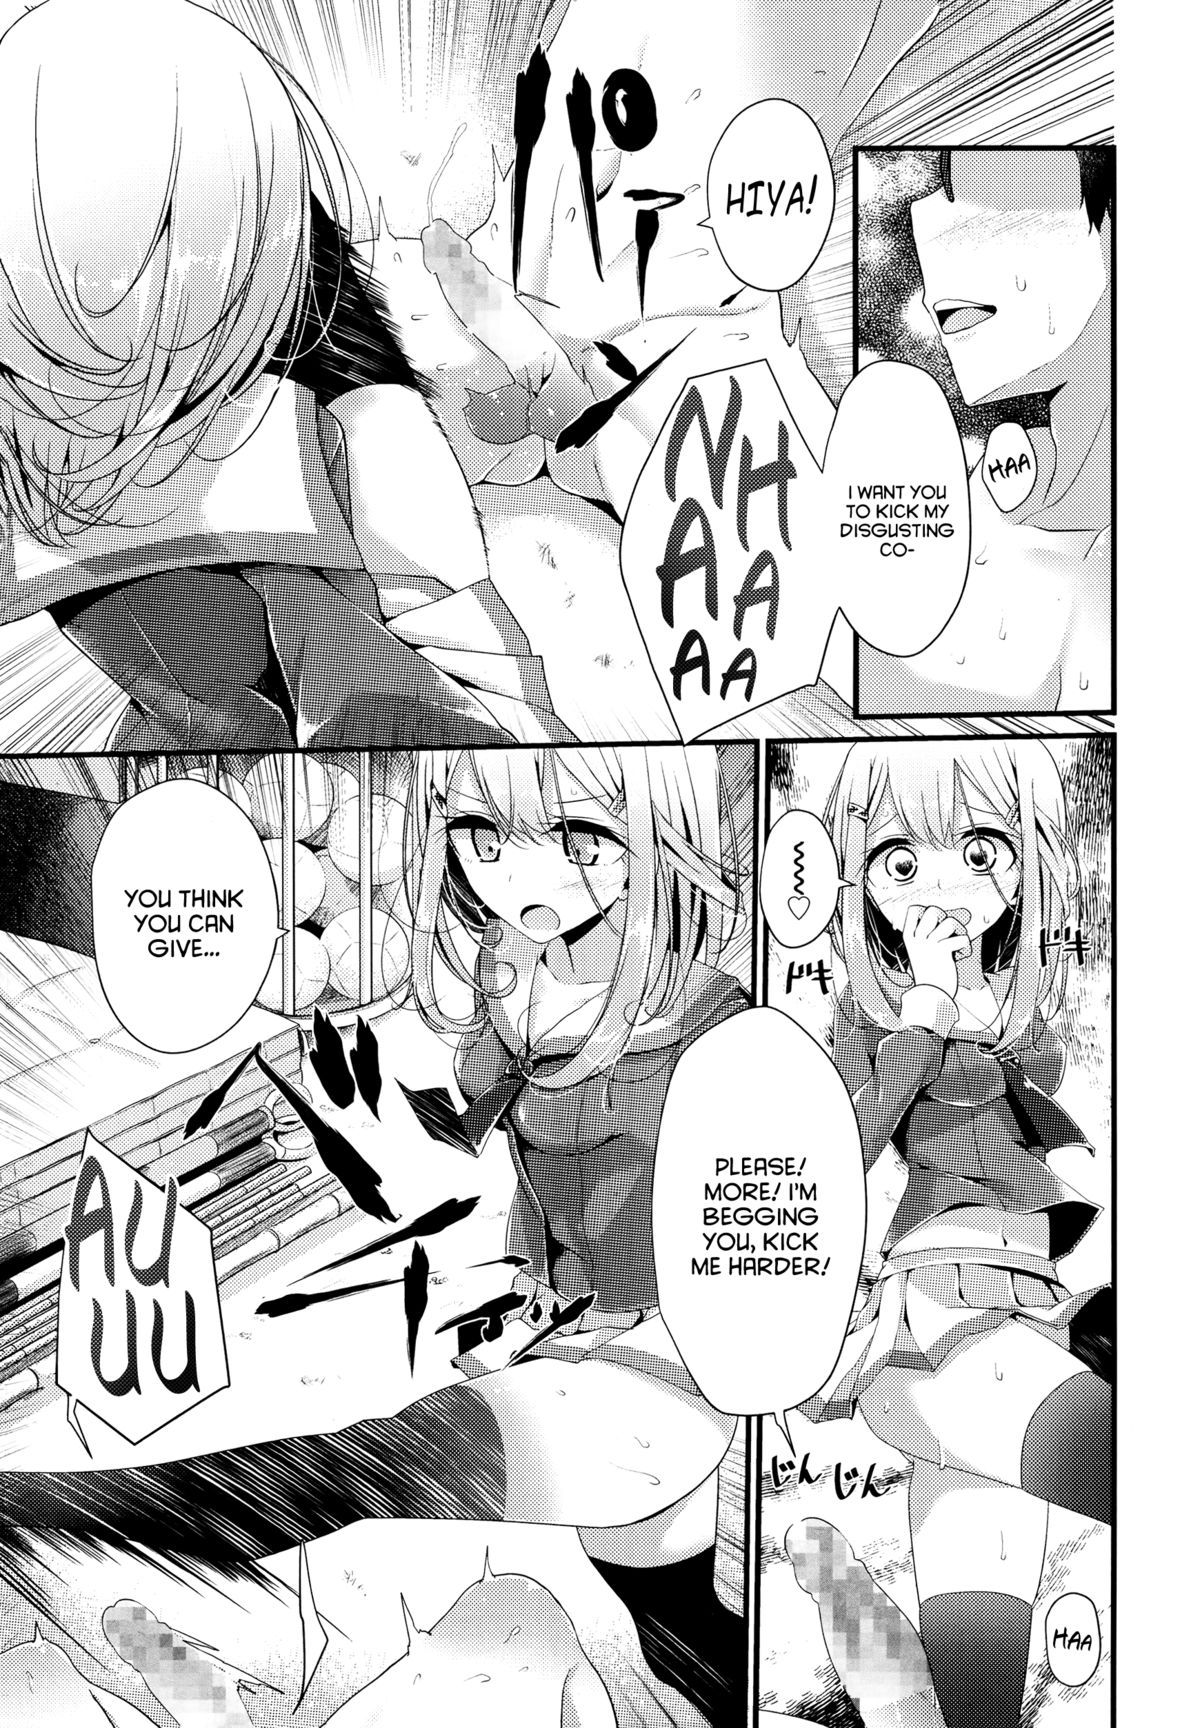 [Oouso] Olfactophilia (Girls forM Vol. 06) [English] =LWB= page 13 full